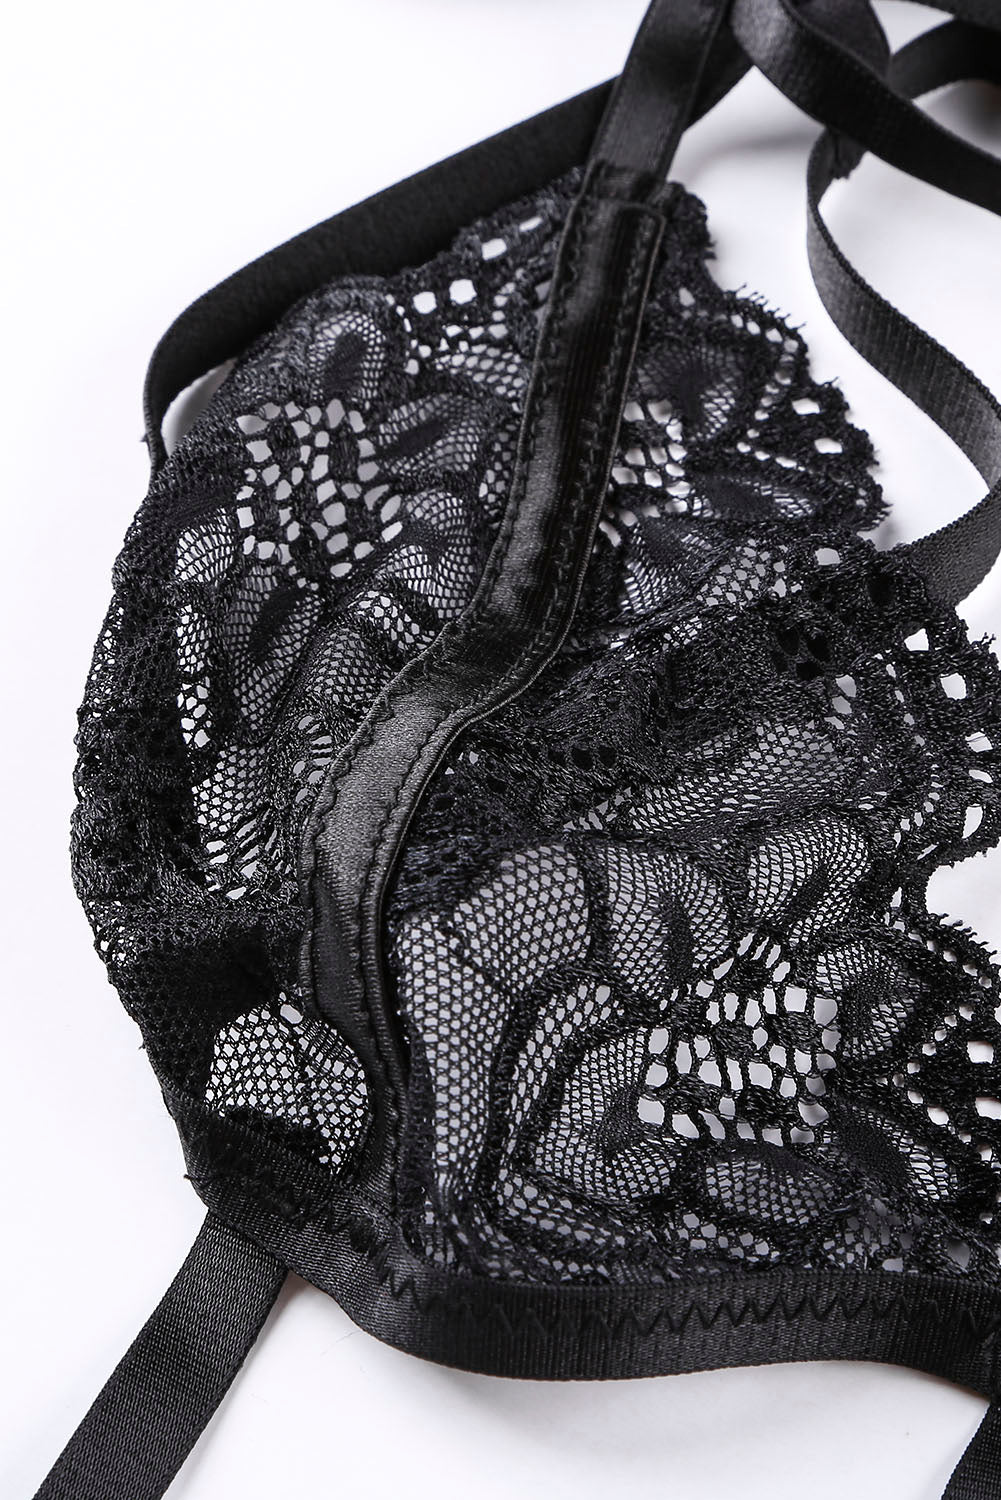 New Moves Hollow Out Black Lace Teddy